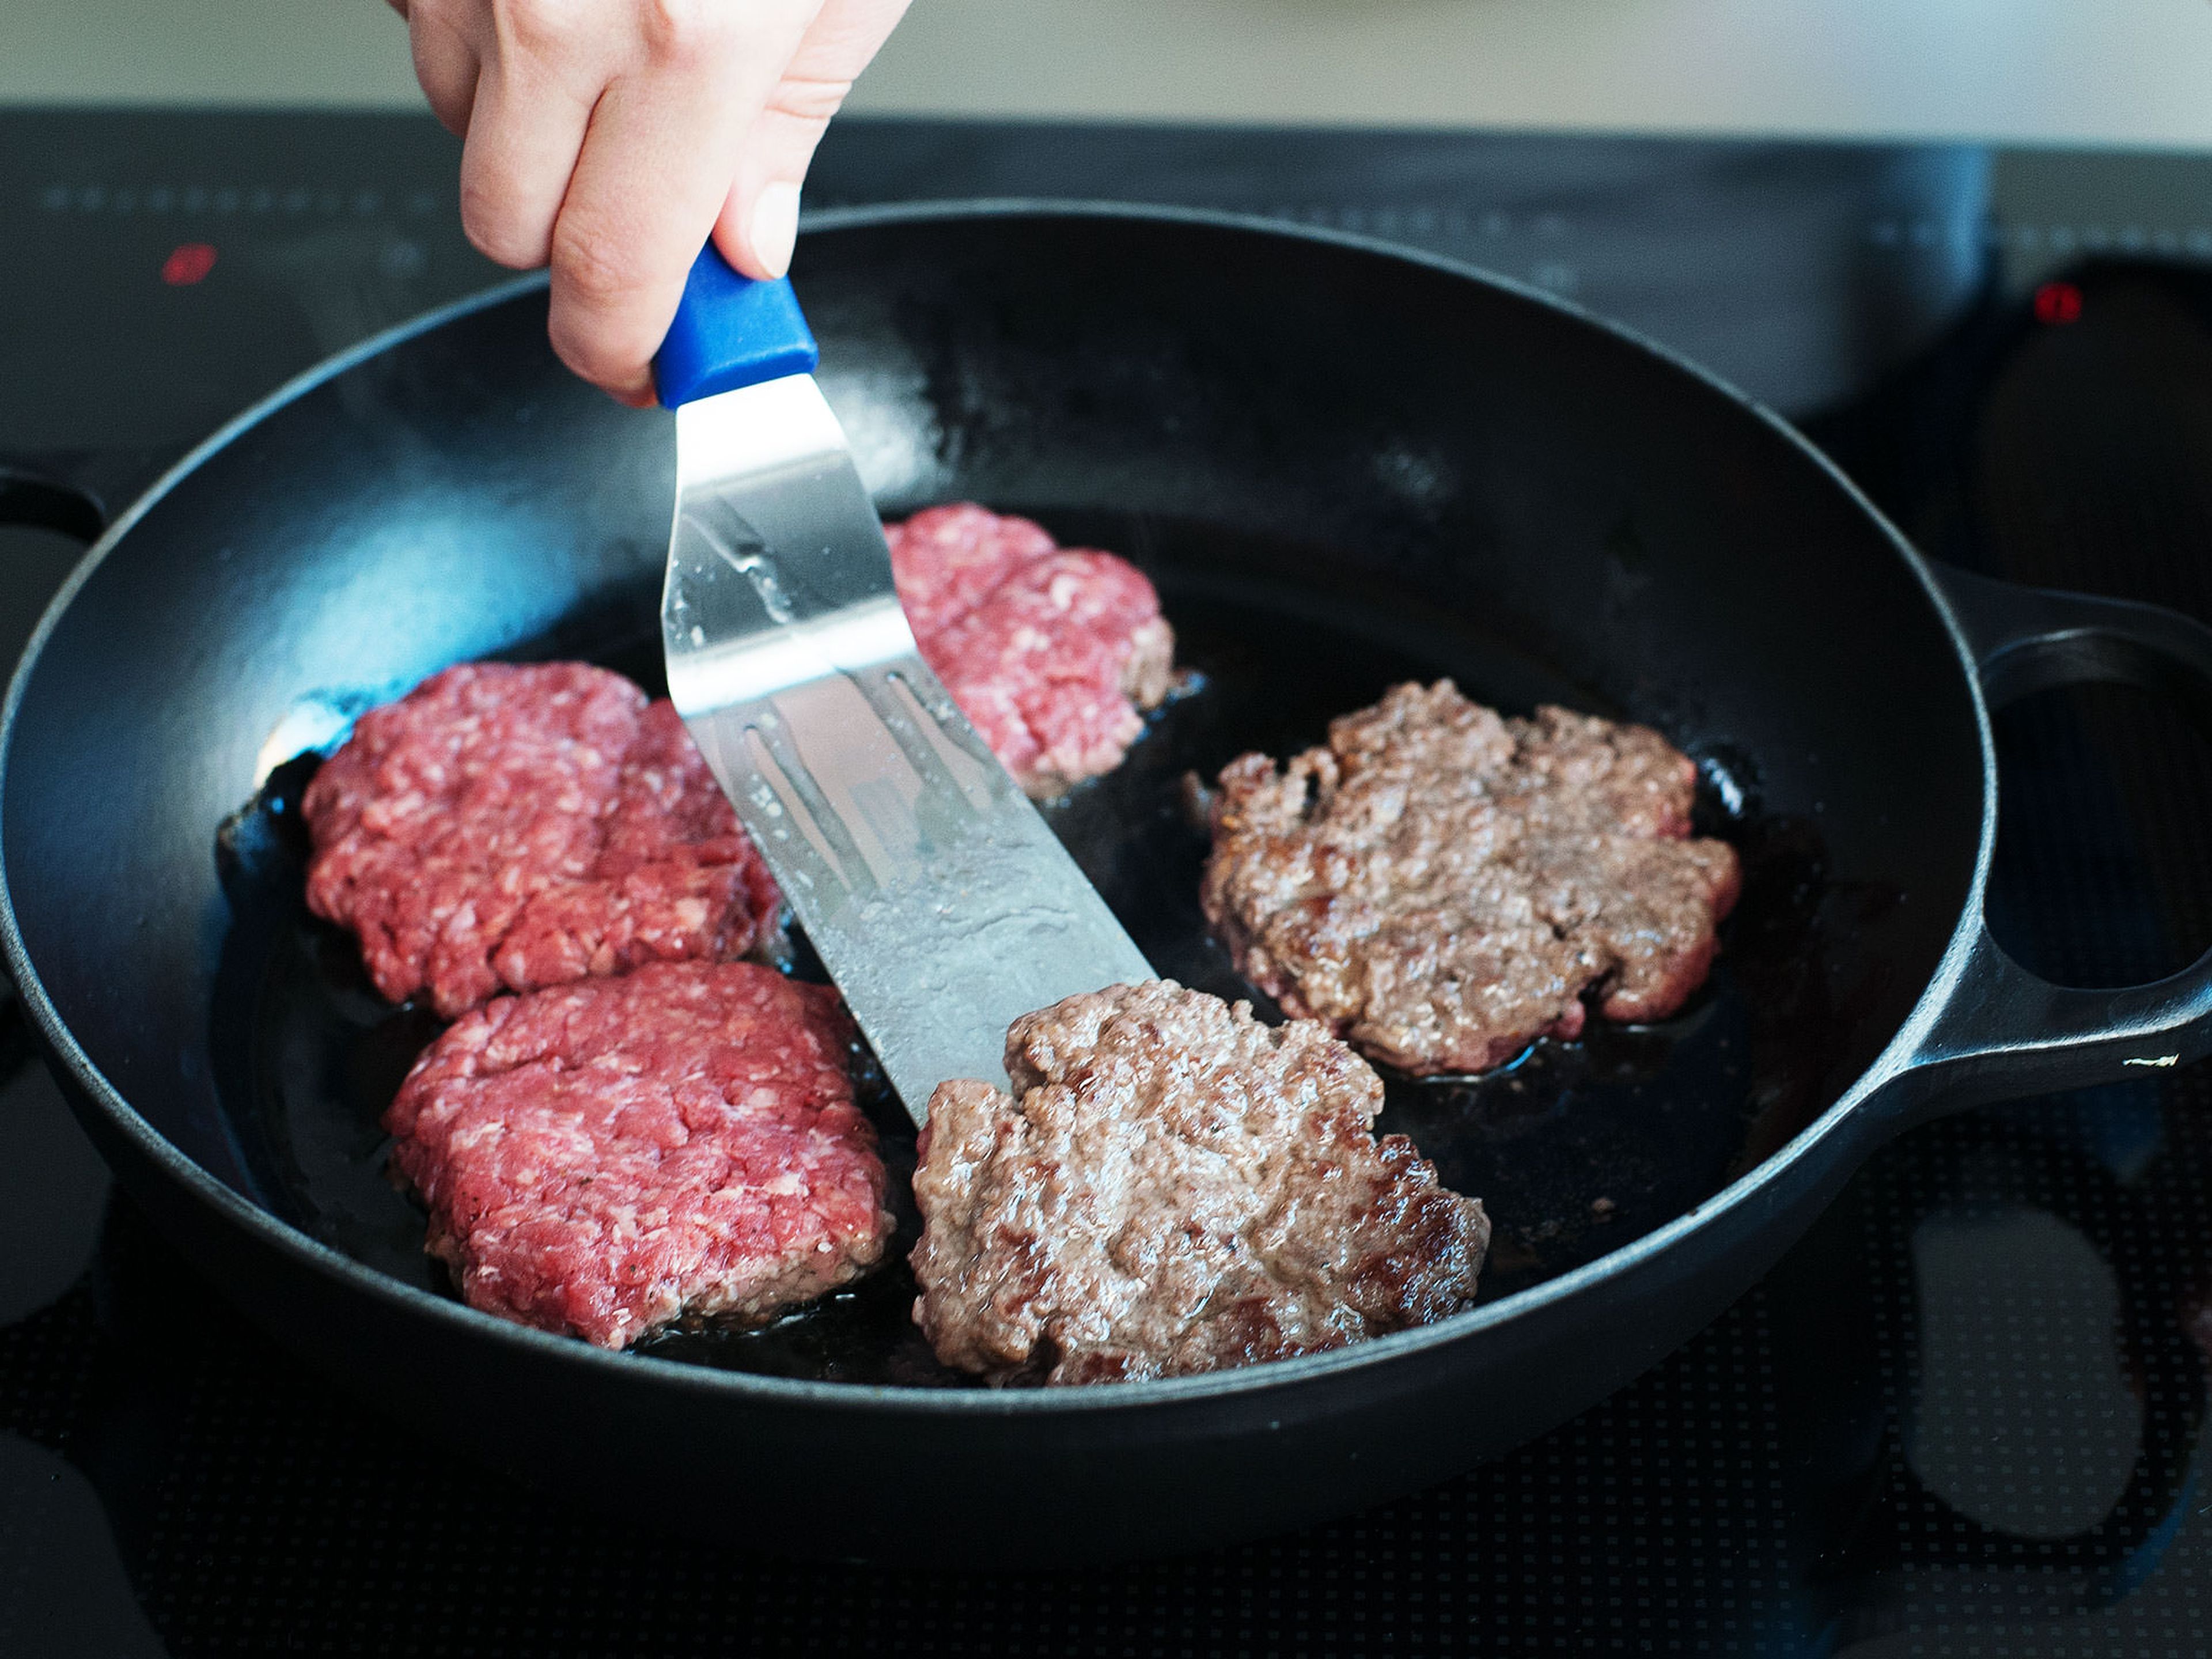 Form 6 equal-sized patties and cook in a frying pan greased with oil over medium-high heat for approx. 3 – 5 min., or until browned on each side and cooked through.